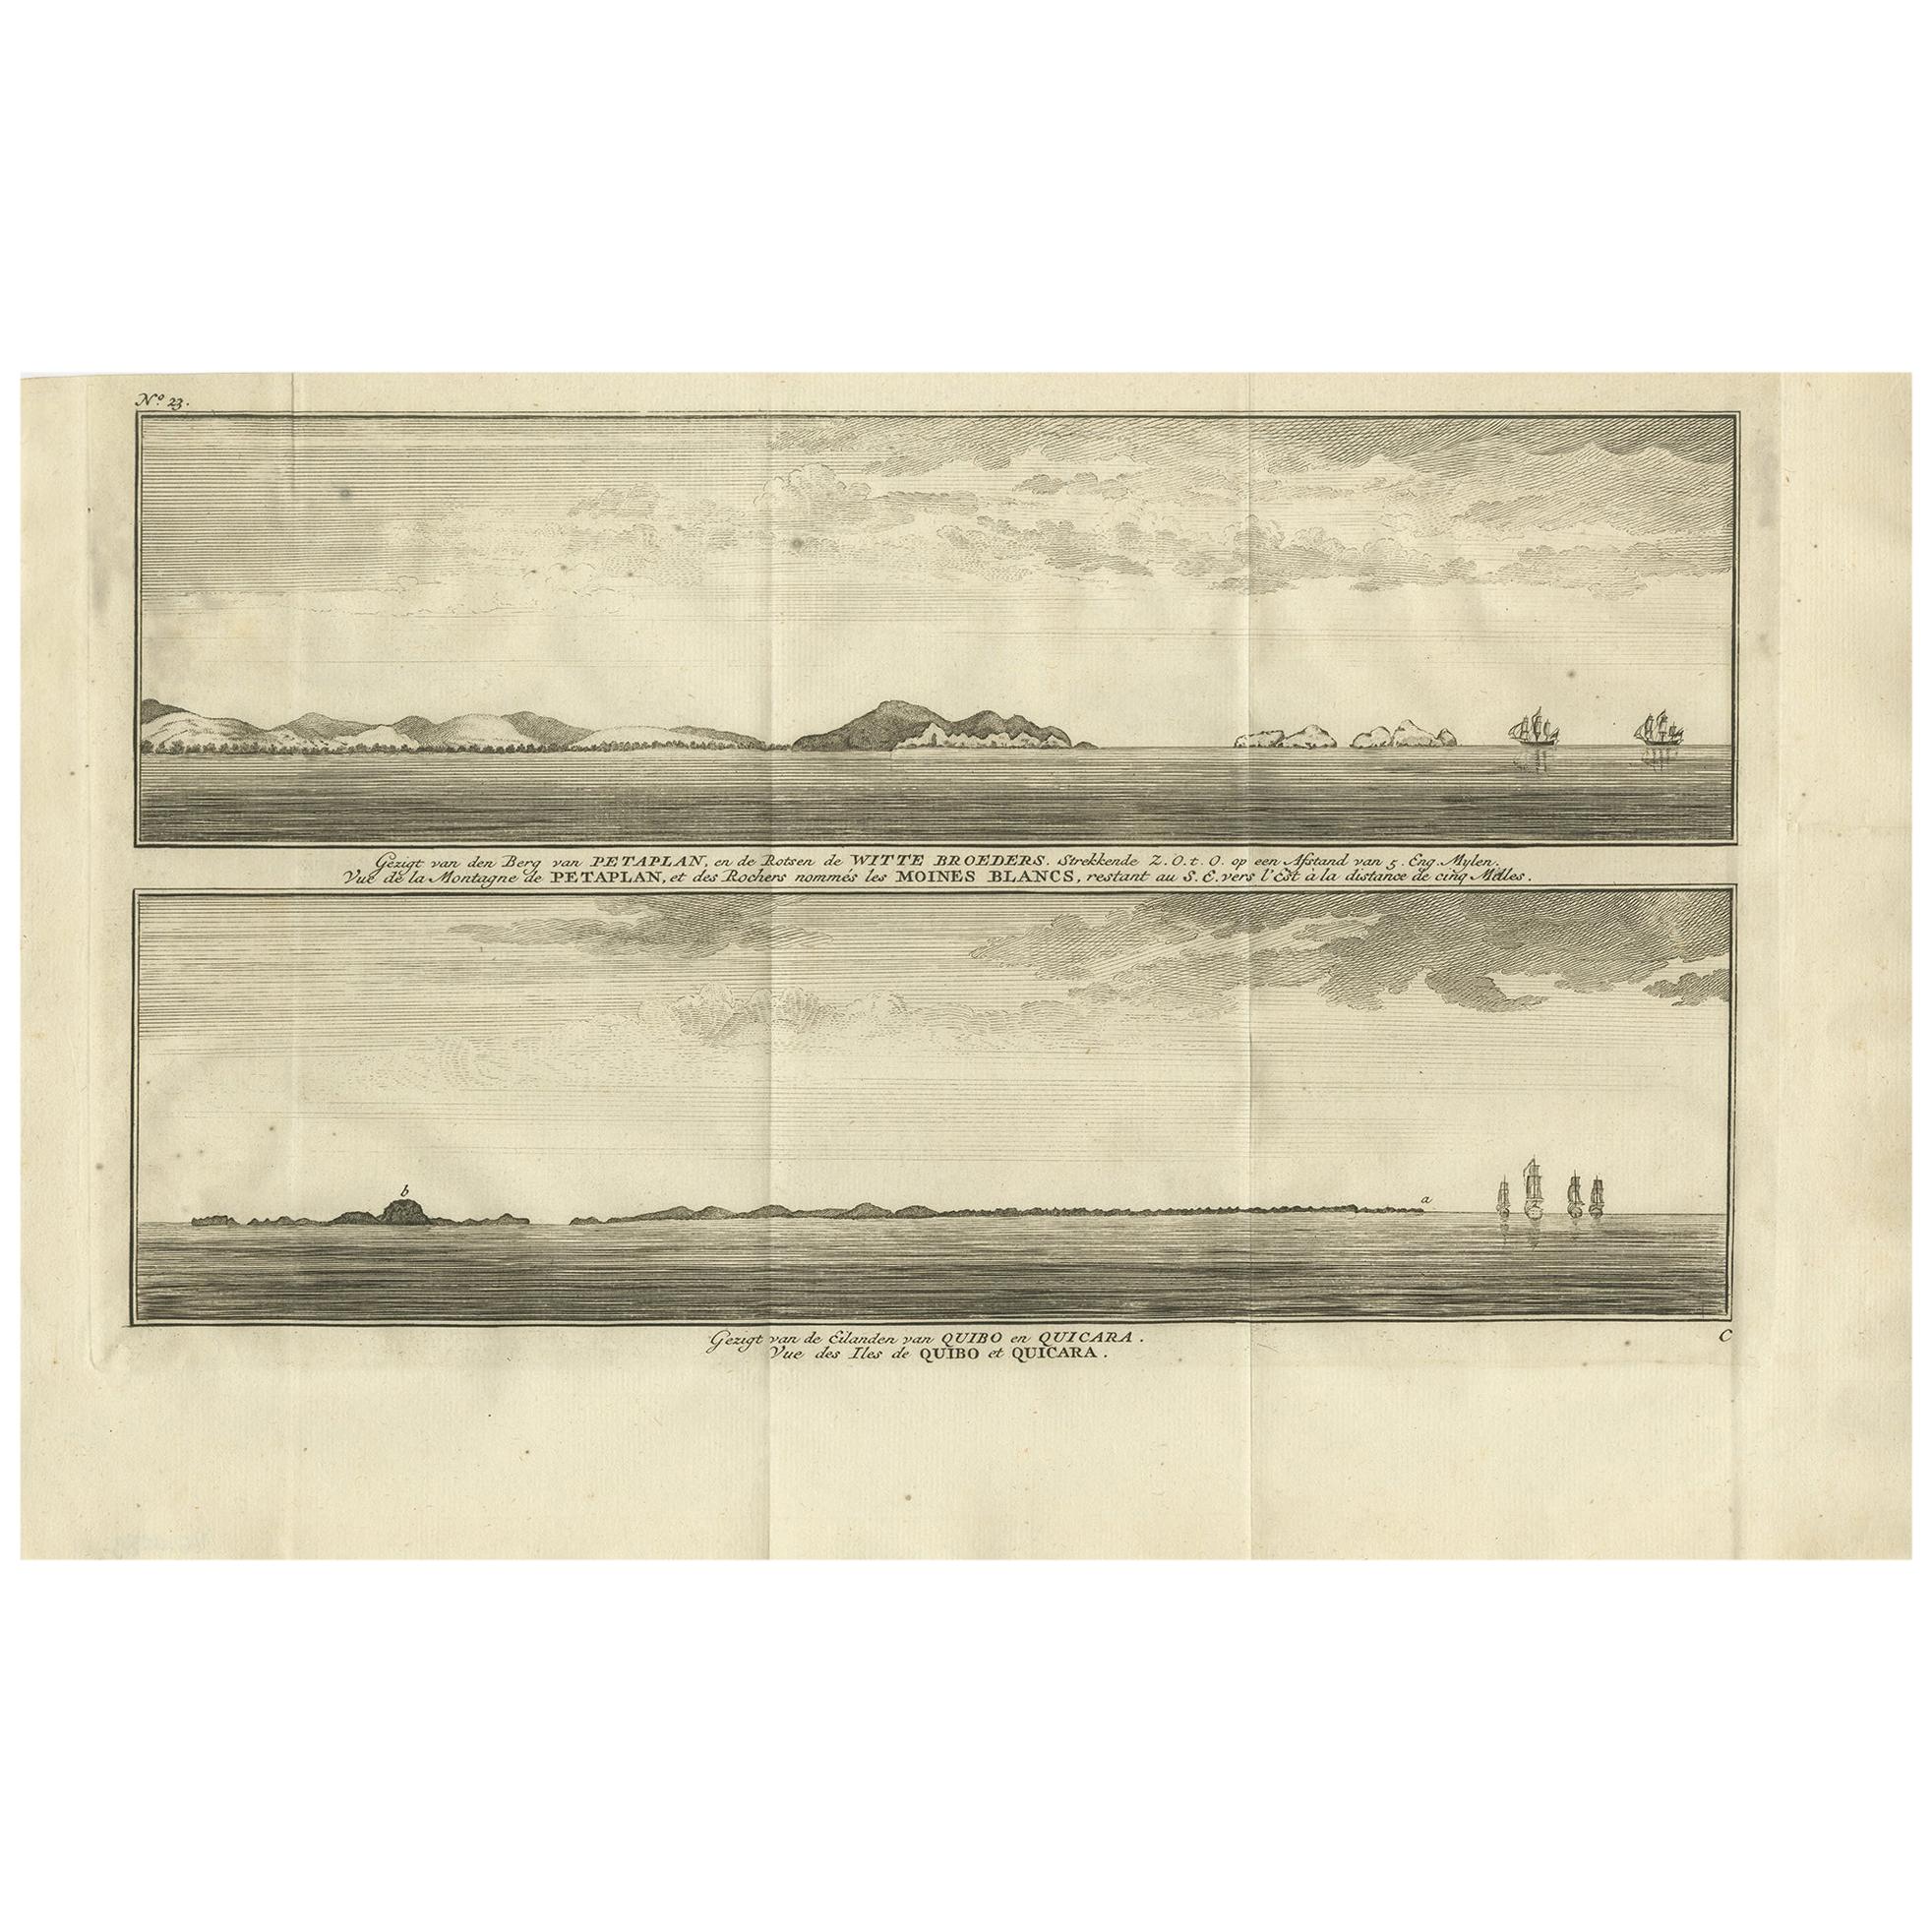 Antique Print of Petatlan and Coiba Island by Anson, '1749' For Sale